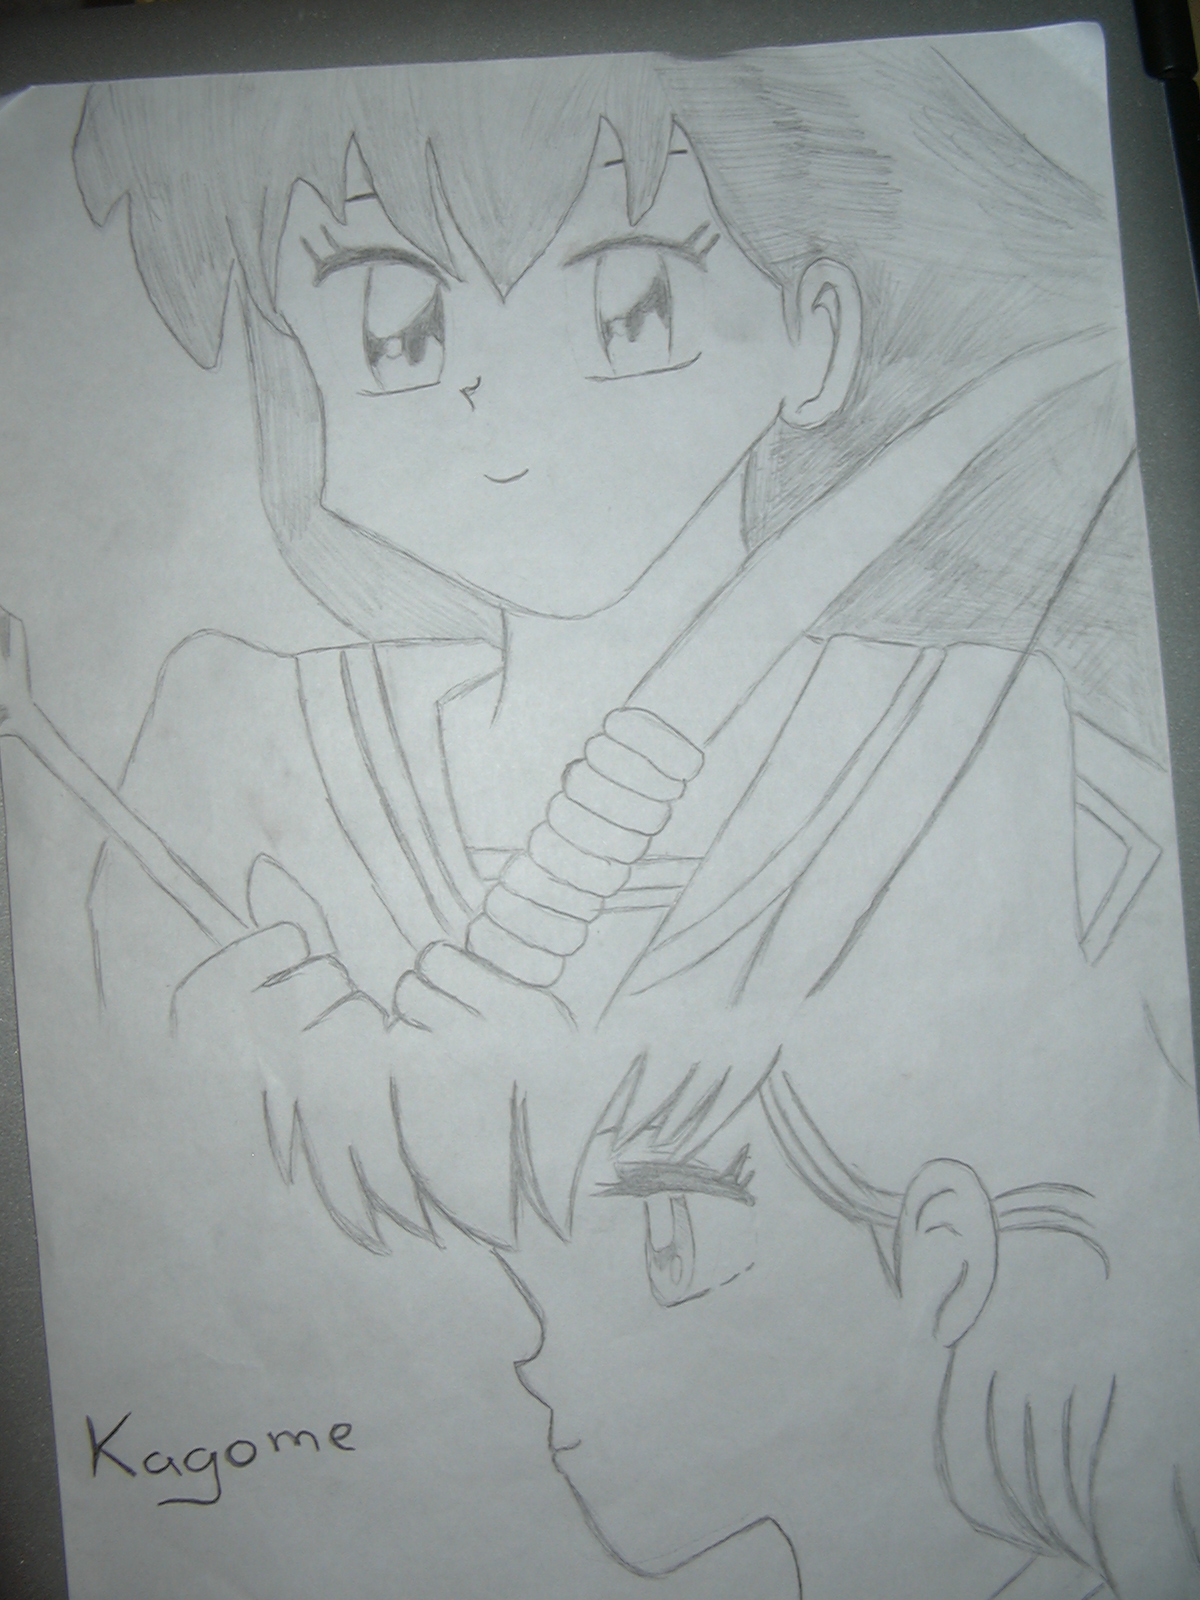 Kagome by lady1